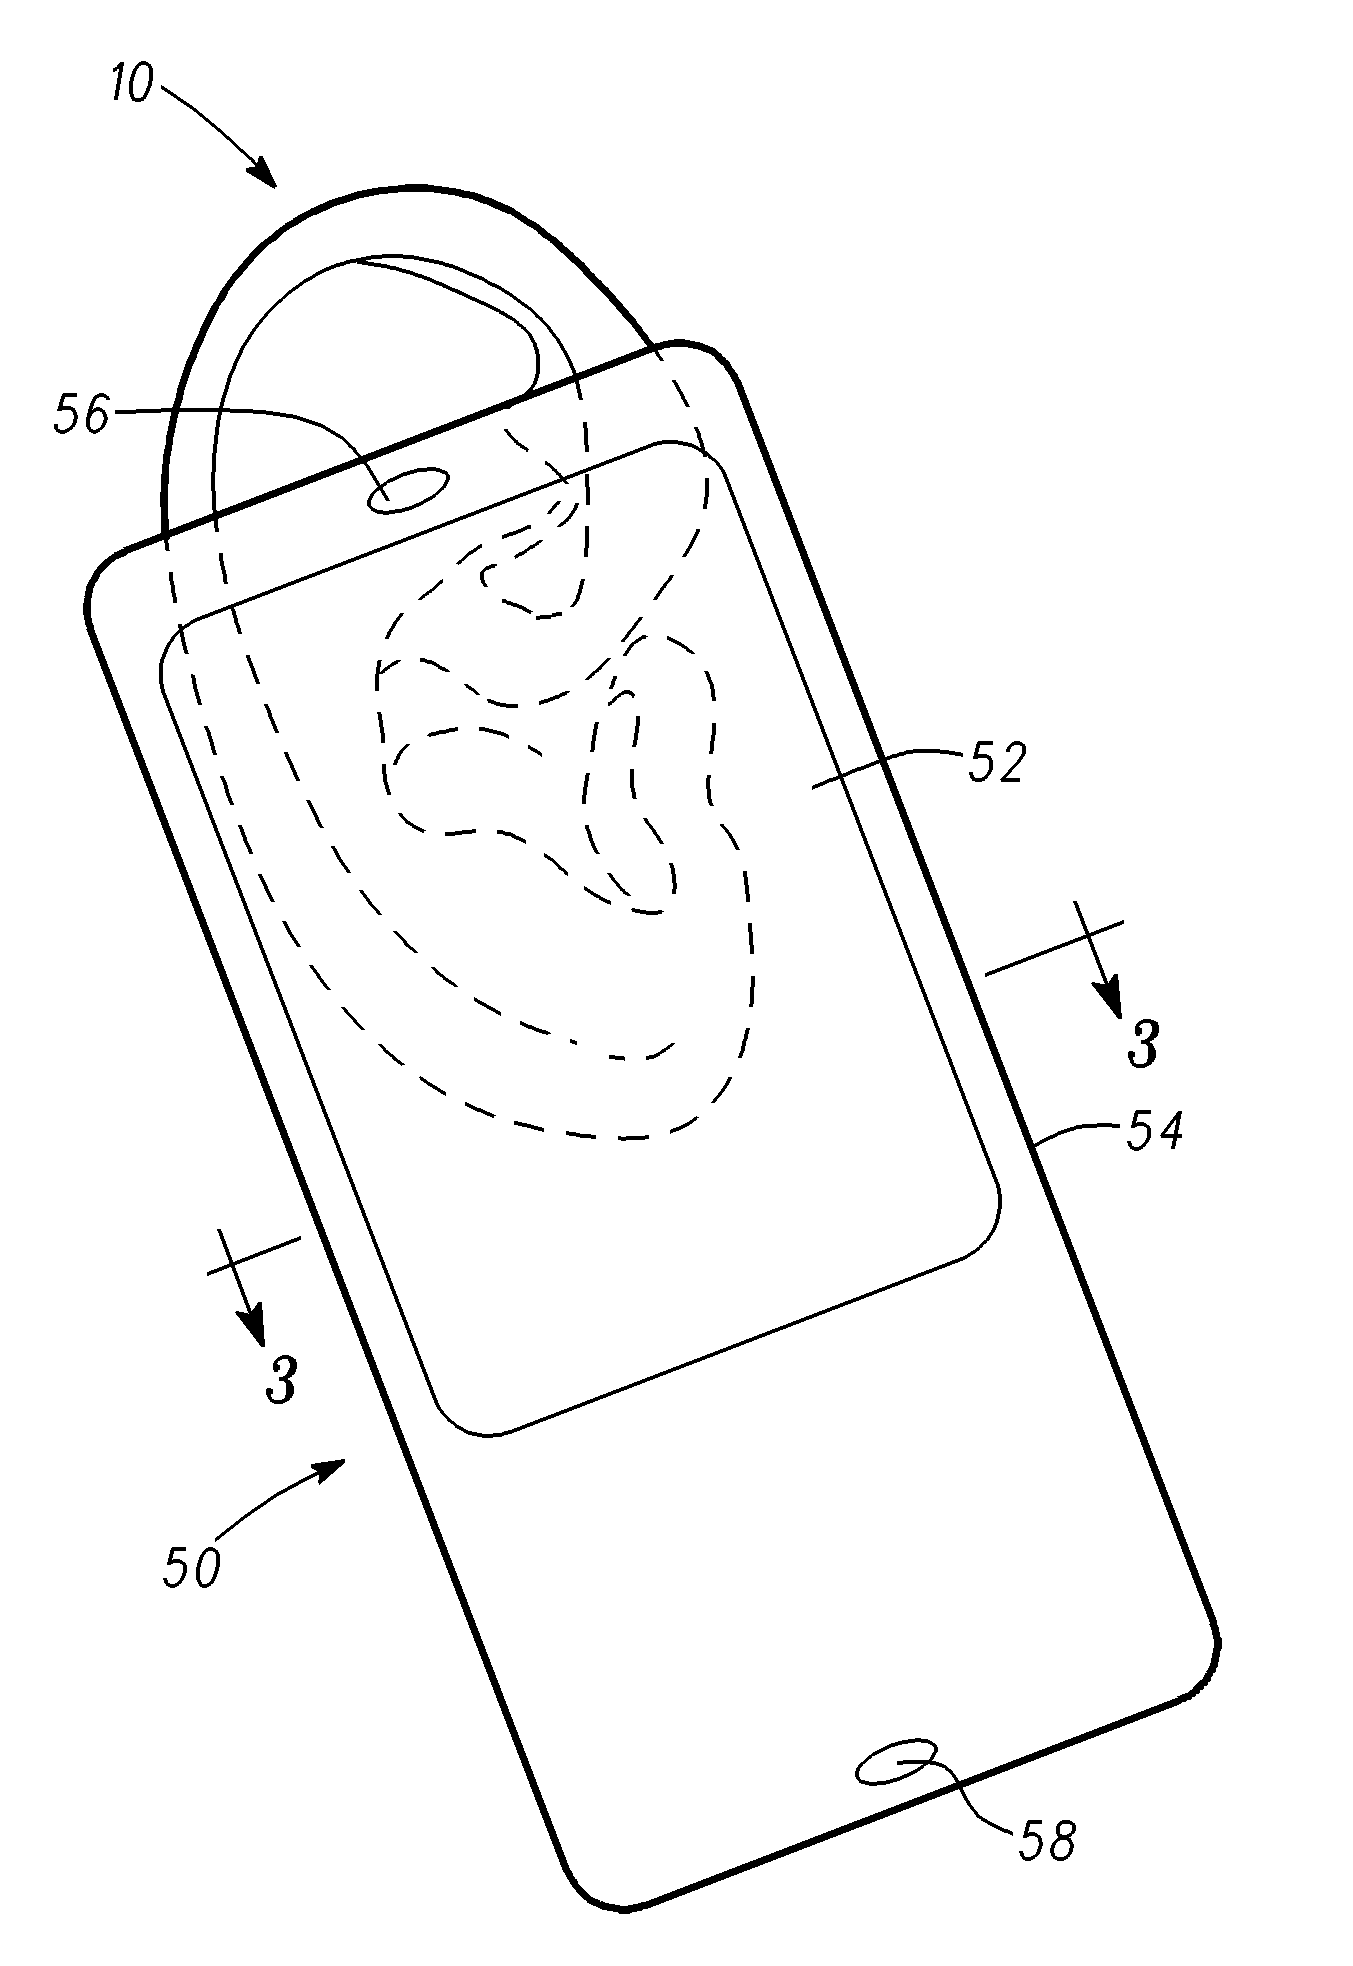 Apparatus and recognition method for capturing ear biometric in wireless communication devices